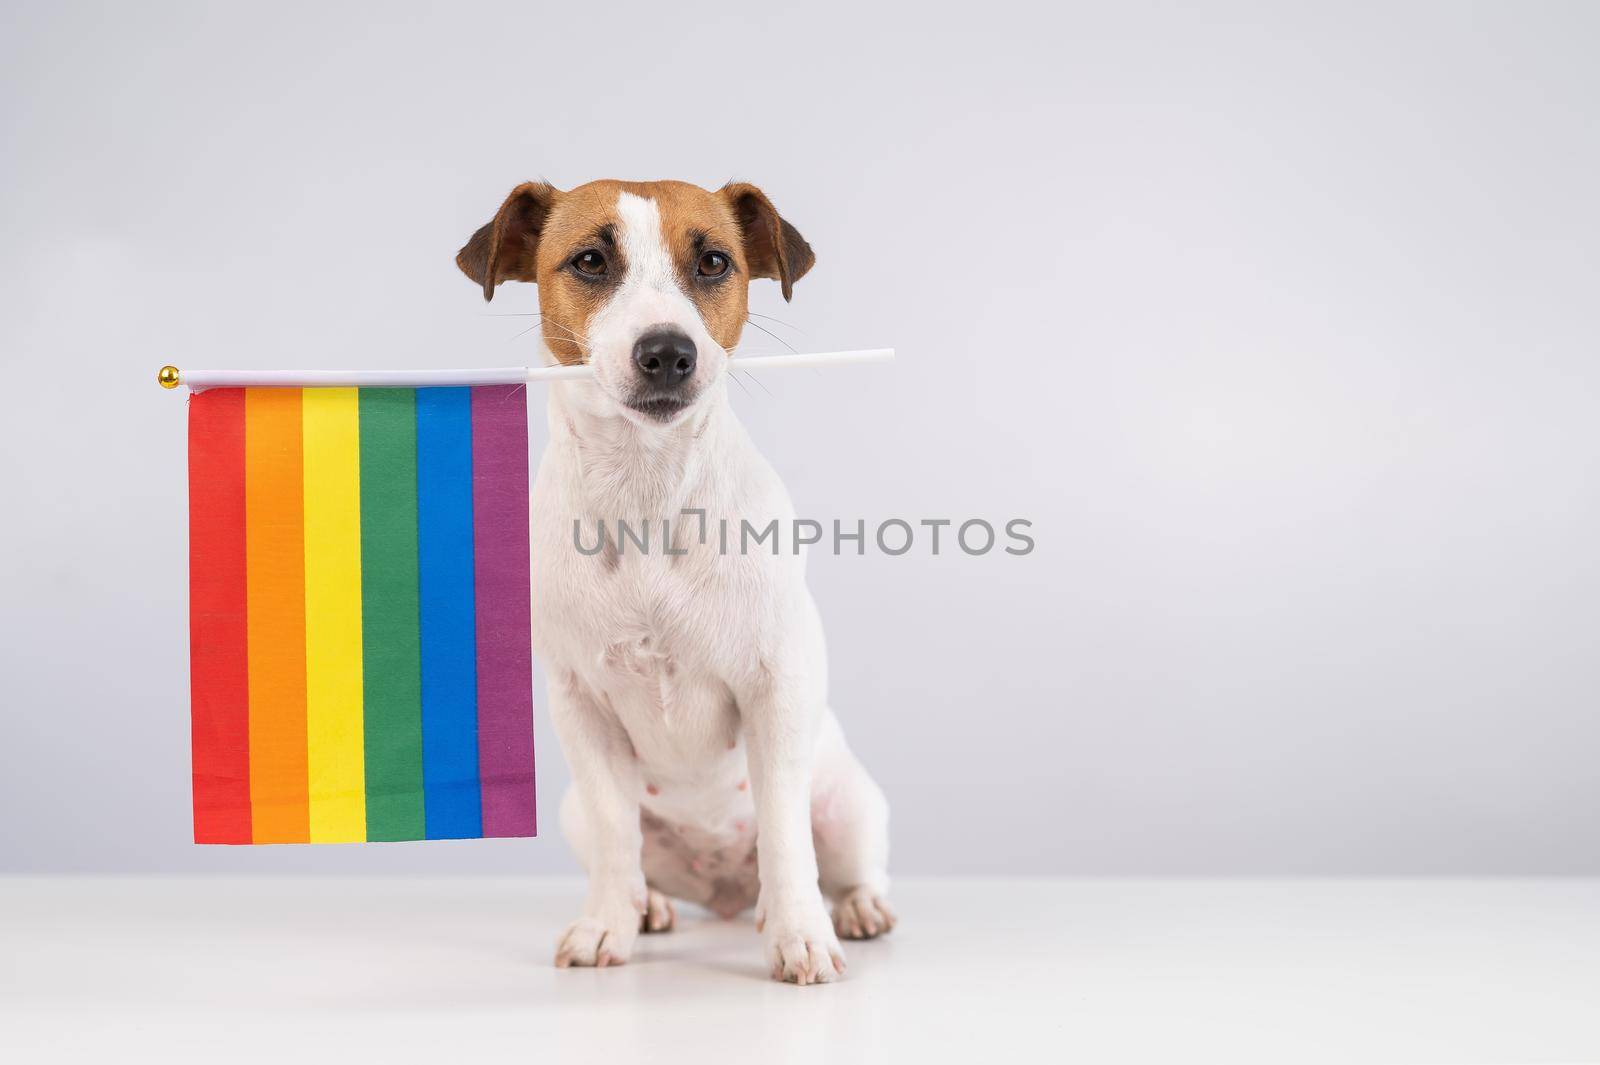 Jack russell terrier dog holding a rainbow flag in his mouth on a white background. Copy space. by mrwed54